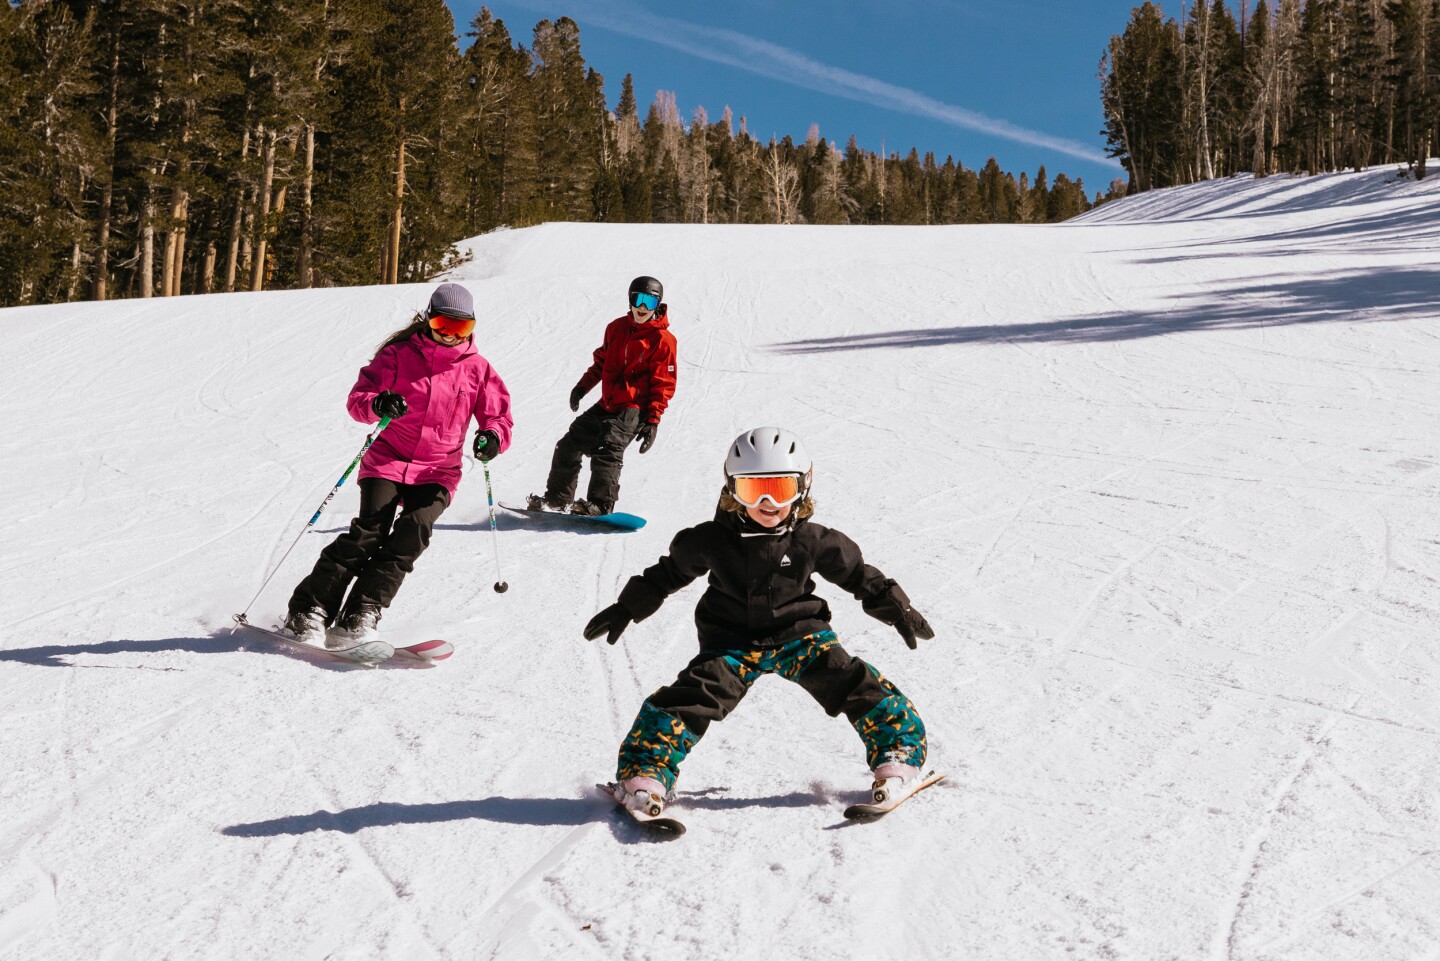 <h2>2. June Mountain</h2> <ul>   <li><b>Location: </b>June Lake, California</li>   <li><b>Best for: </b>View-seeking skiers; Ikon passholders; individuals and families looking to brush up or expand their ski skills</li>   <li><b>Where to stay:</b> <a class="Link" href="https://www.marriott.com/en-us/hotels/mmhwi-the-westin-monache-resort-mammoth/overview/" rel="noopener">The Westin Monache Resort, Mammoth</a>: This well-appointed Westin is steps from the Mammoth Mountain gondola and a quick drive to June Mountain, making it ideal for skiers who want to experience both in one trip. Opt for a Mammoth Studio suite for a full kitchen and gas fireplace, and enjoy the hotel’s rejuvenating hot tubs and strong, fresh coffee available free in the lobby each morning.</li>  </ul> <p>A large sign at the base of <a class="Link" href="https://www.junemountain.com/" rel="noopener">June Mountain</a> makes it clear you’ve arrived at “California’s Family Mountain.” While that accolade is true, June’s 1,500 skiable acres make it more of an actual “skier’s mountain” where the whole family can lap groomer runs (or even build up confidence on gentle black diamond terrain). Skiers from popular <a class="Link" href="https://www.mammothmountain.com/" rel="noopener">Mammoth Mountain </a>are also lured to the area, with many regulars there considering it a vacation from their home mountain when the crowds roll in. The pleasant nature and spellbinding views over June Lake and the Sierra Nevadas from the hill are reason enough to come, as is its peaceful atmosphere.</p> <p>While Mammoth is known for its epic<a class="Link" href="https://www.afar.com/magazine/essential-guide-to-apres-ski" rel="noopener"> après party scene</a>, June Mountain has fewer frills. Mere minutes away, the laid-back town of June Lake offers off-mountain options for hungry skiers and those needing a postrun cocktail. Its best-kept secret is <a class="Link" href="https://www.instagram.com/laparrilla_158/" rel="noopener">La Parilla</a>, a taco truck serving Mexican and Tex-Mex staples, including burritos, fajitas, tacos, and quesadillas. The truck is parked at <a class="Link" href="https://www.junelakebrewing.com/" rel="noopener">June Lake Brewing</a>, which has outdoor seating, hard seltzers (called Bang Sauce), and a variety of specialty craft beers best enjoyed under the warm California sun.</p>